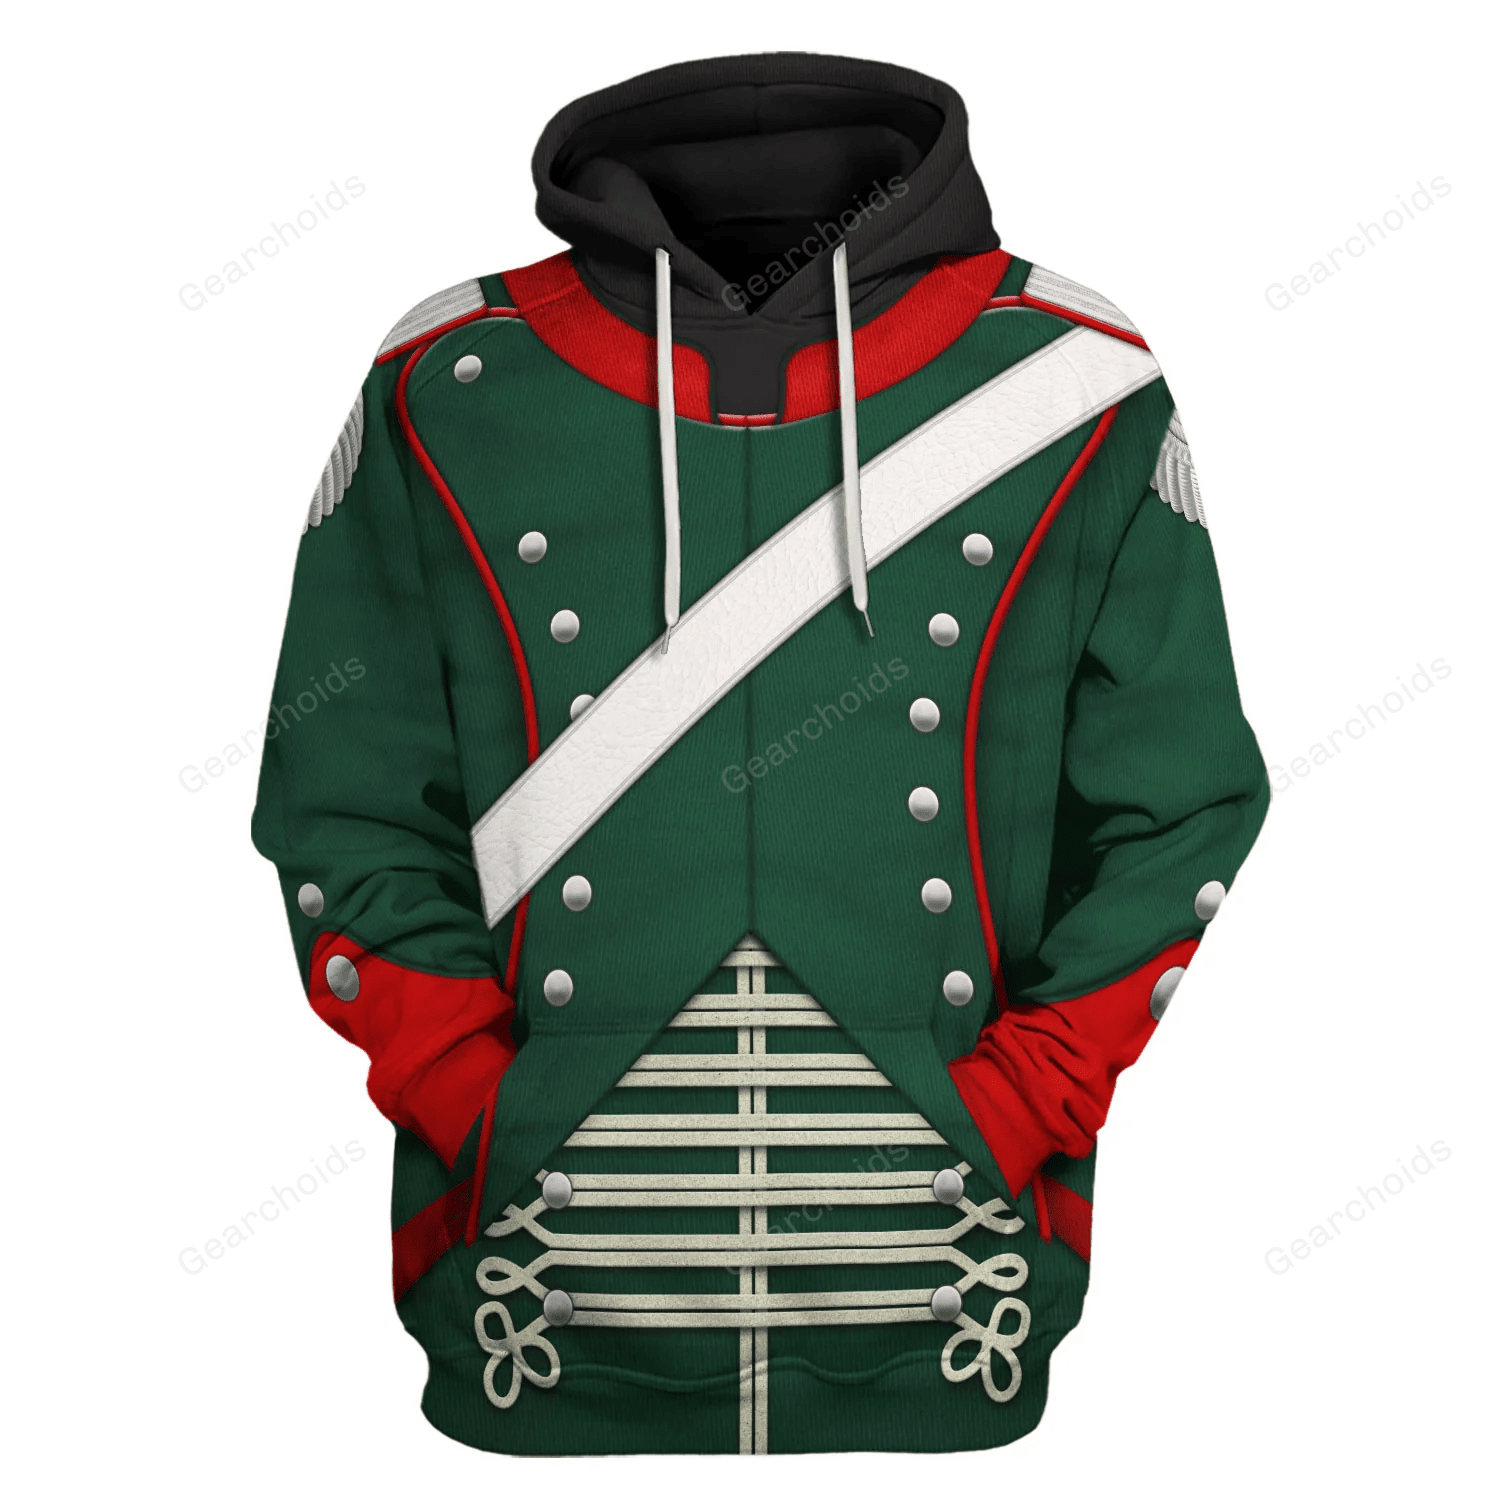 Gearchoids Napoleonic French Light Cavalry-Chasseur A Cheval-Officer (1806-1815) Uniform All Over Print Hoodie Sweatshirt T-Shirt Tracksuit